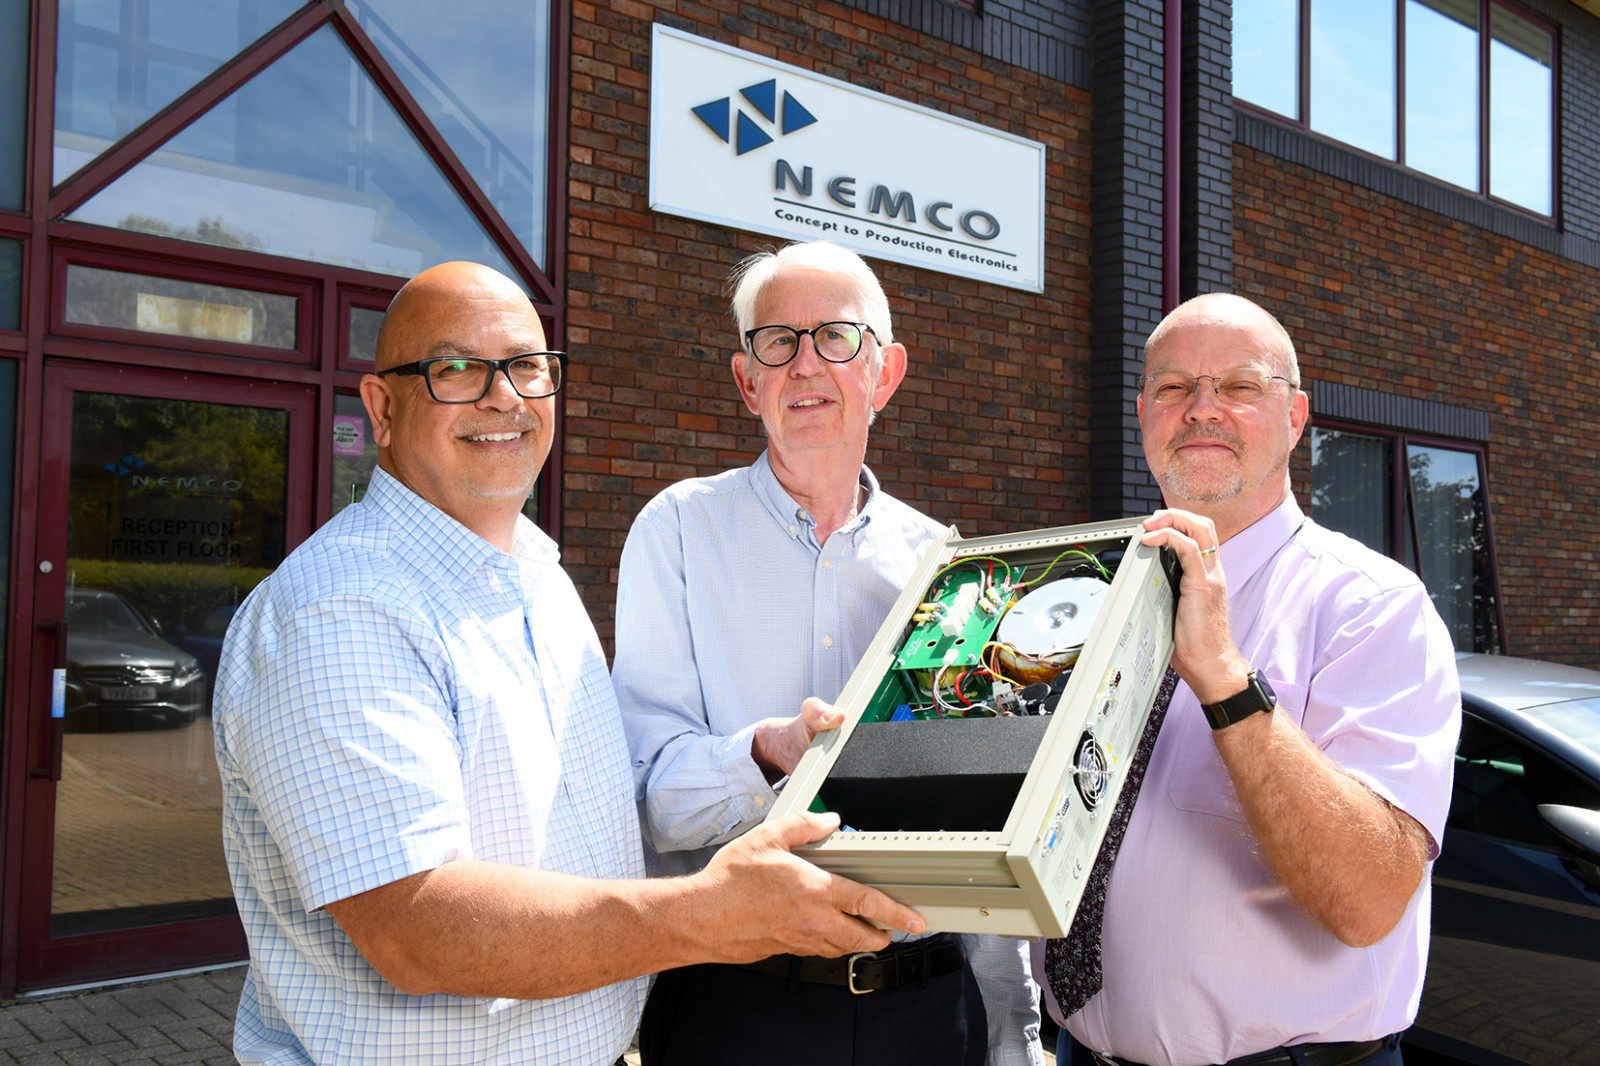 Nemco joins MAN Group as it aims to push sales tow...